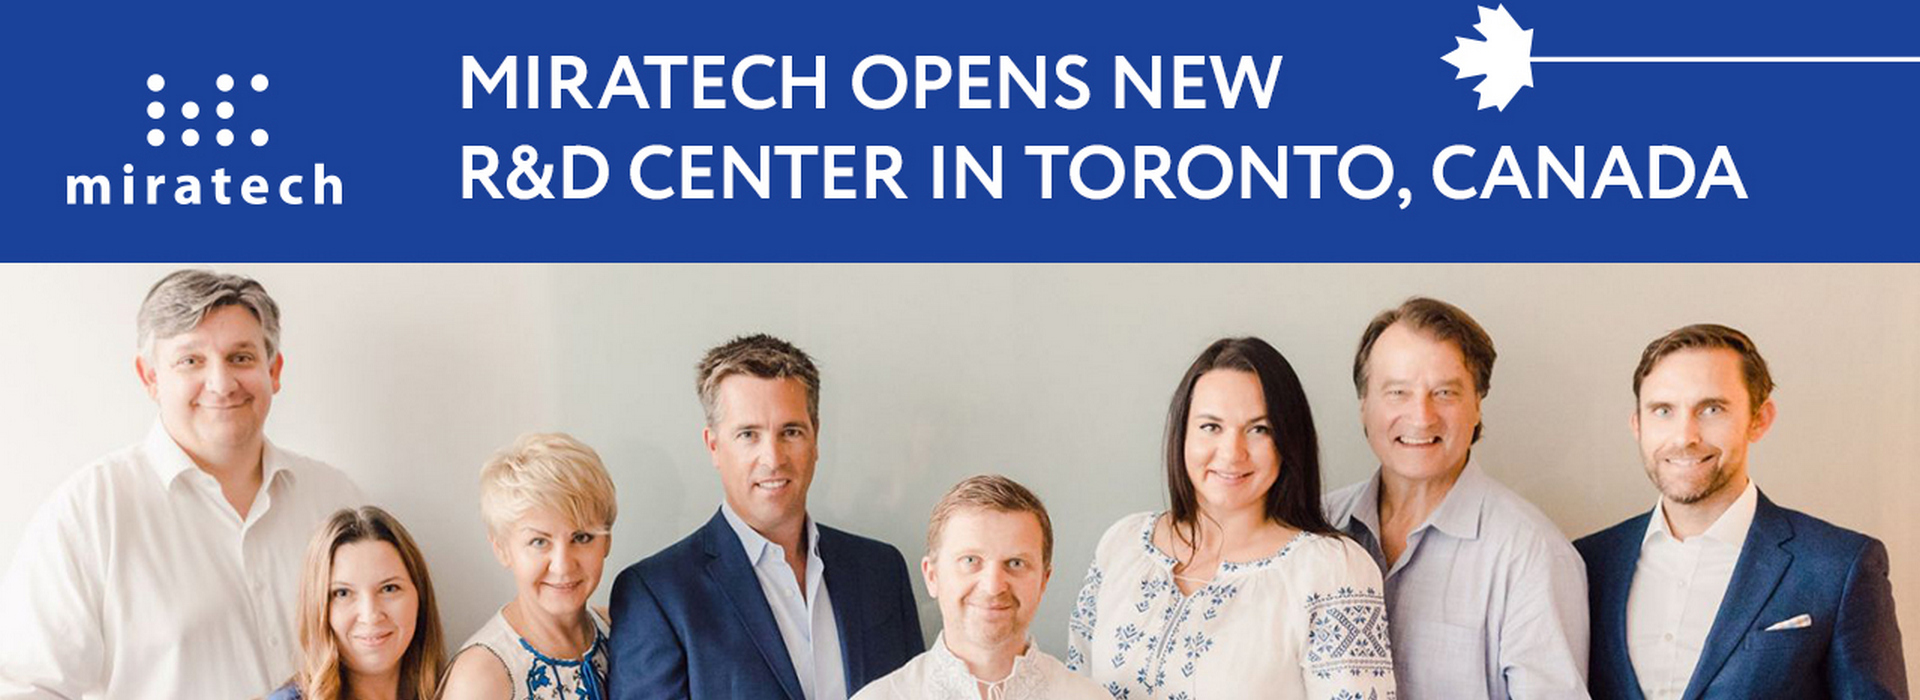 Miratech Continues Global Expansion: Opens New R&D Center in Toronto, Canada